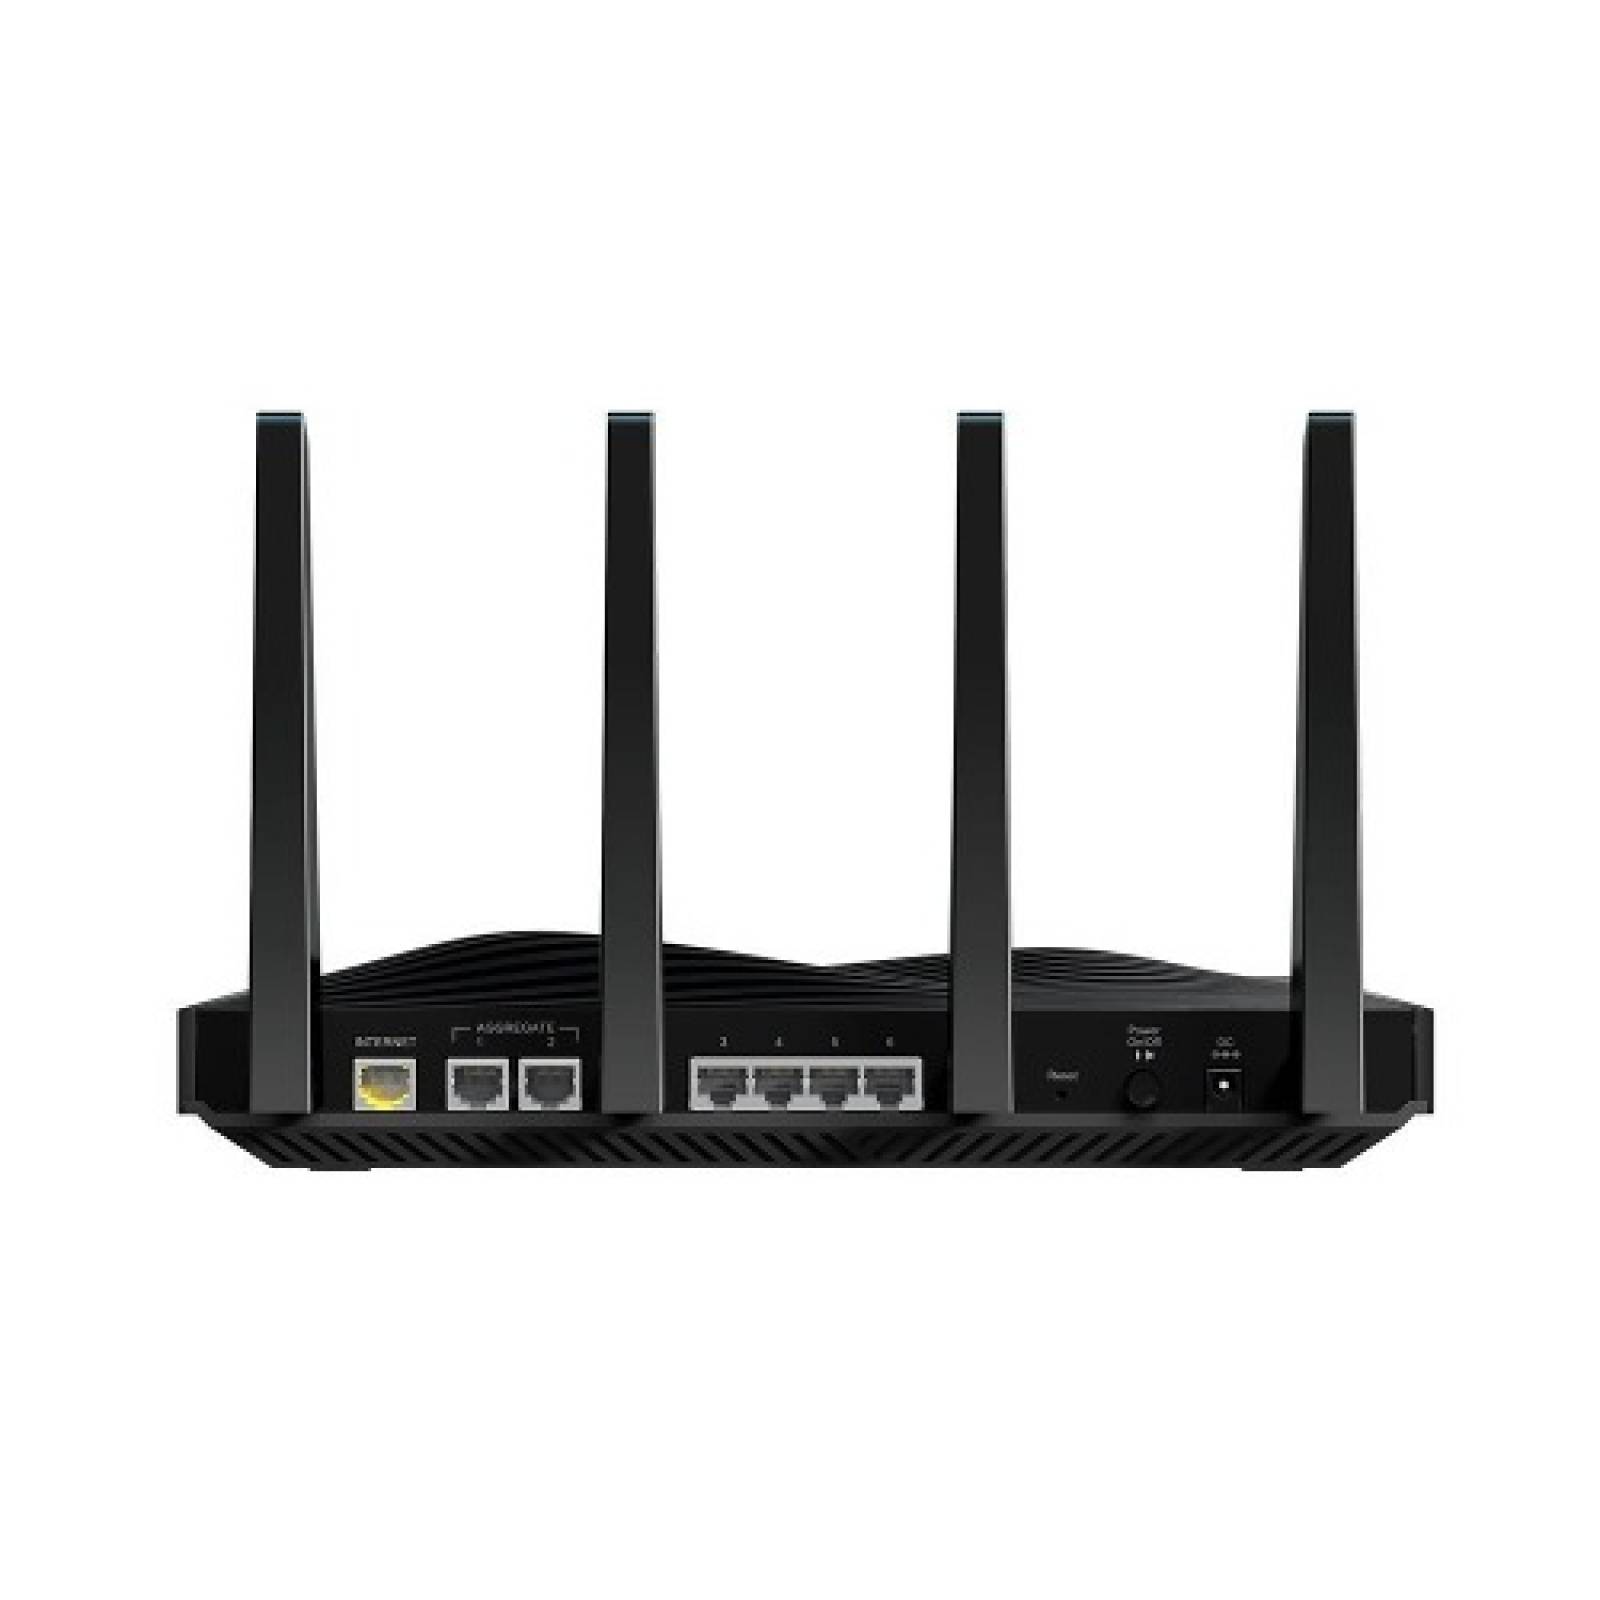 Repetidor Wifi Router Inalámbrico 7PT Tri band X8 Zyxel